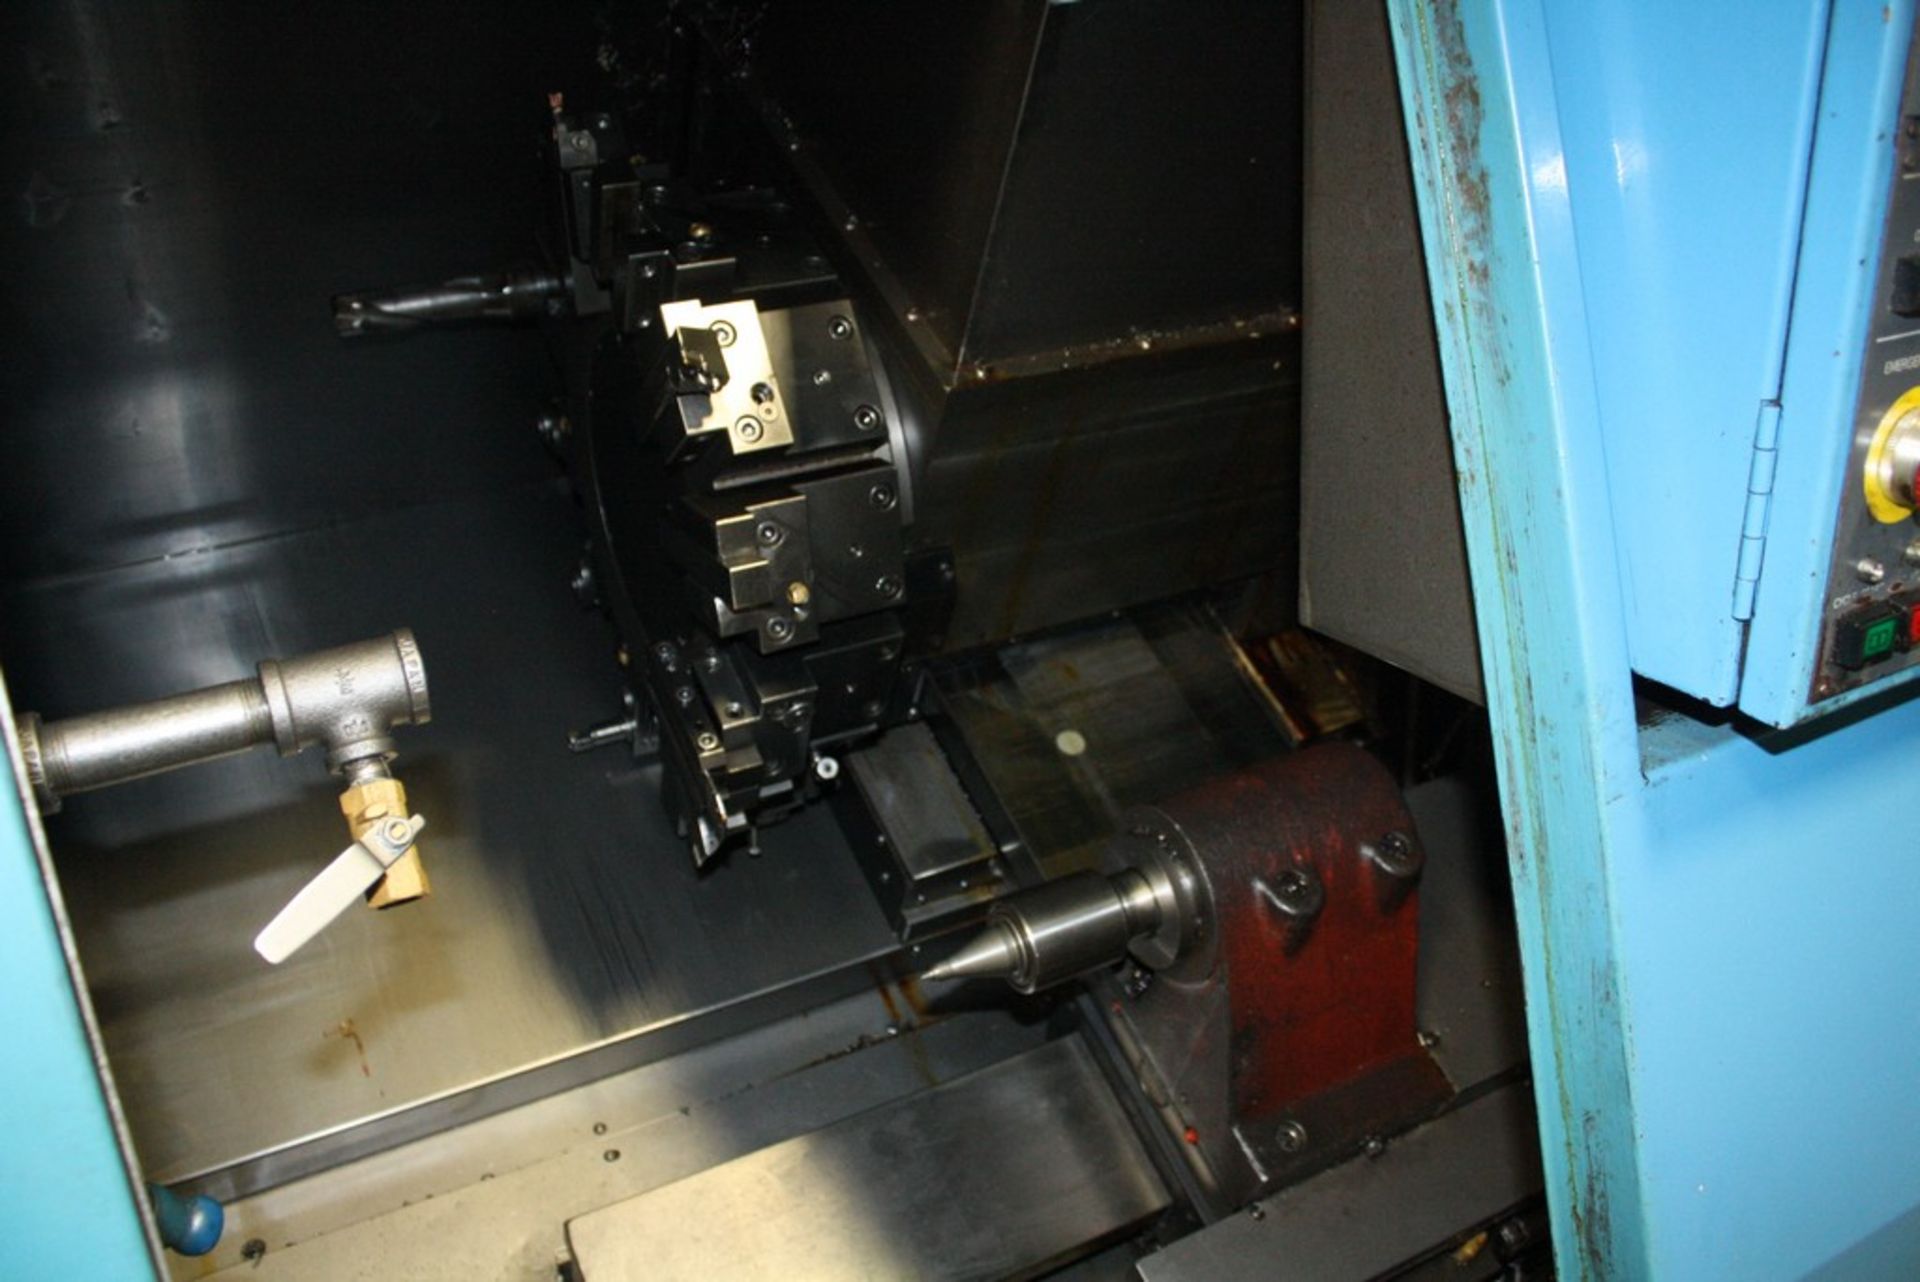 MIYANO MODEL LE-41 CNC TURNING CENTER, S/N L410019, 3-1/8" HOLE THRU SPINDLE, TAILSTOCK, PARTS - Image 5 of 7